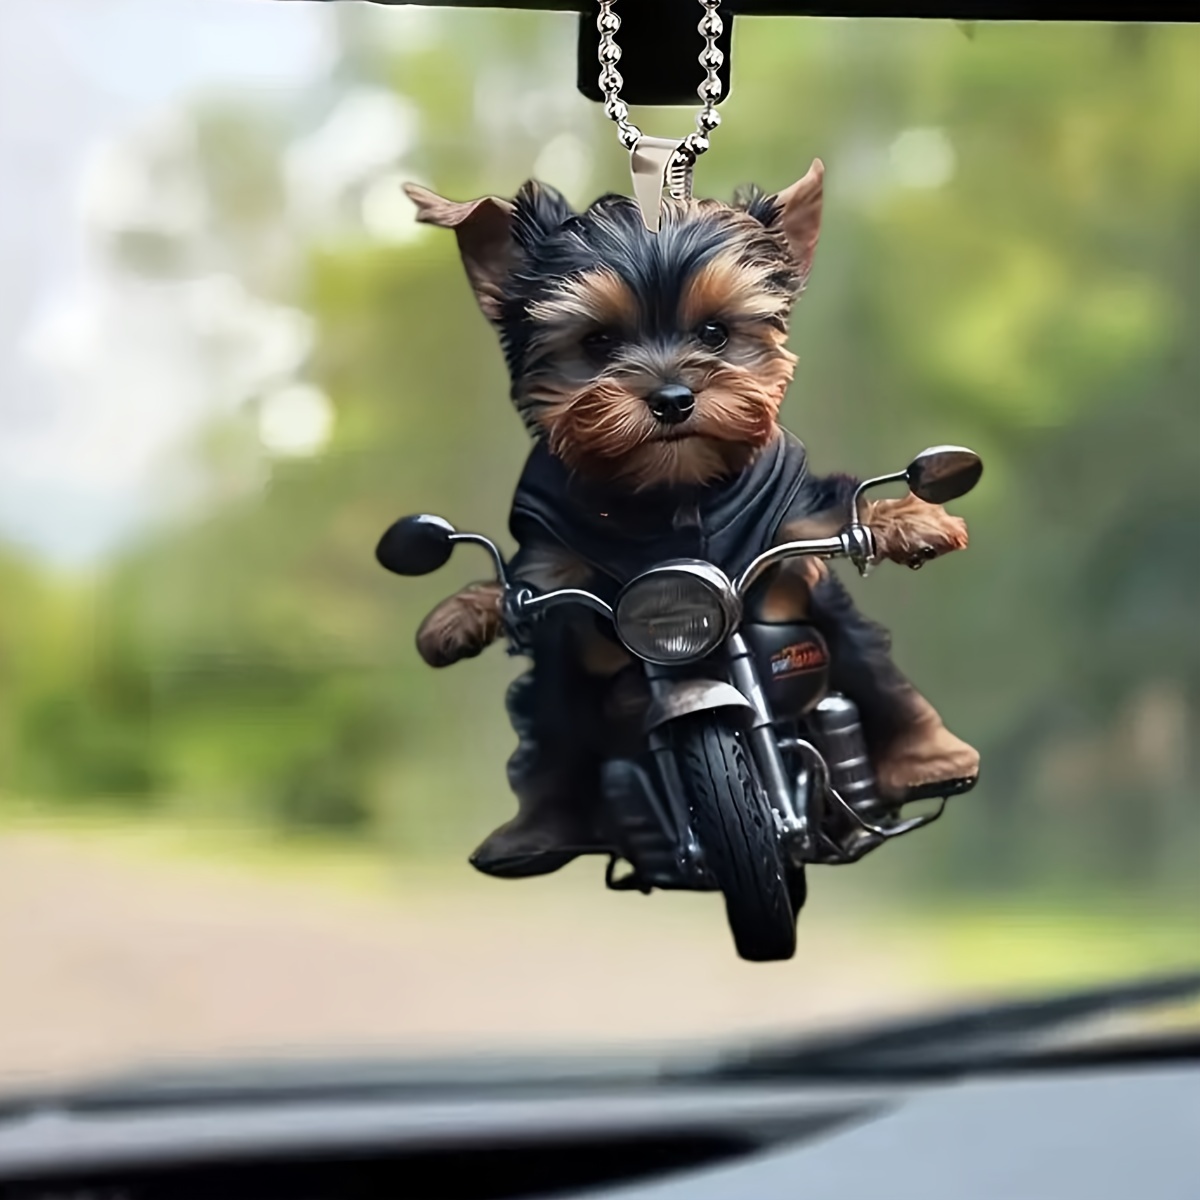 

Yorkshire Terrier On Motorcycle Acrylic Hanging Ornament, 2d Yorkie Biker Pendant For Car Rearview Mirror, Cute Dog Backpack Accessory, Home Decor, Christmas Tree Charm